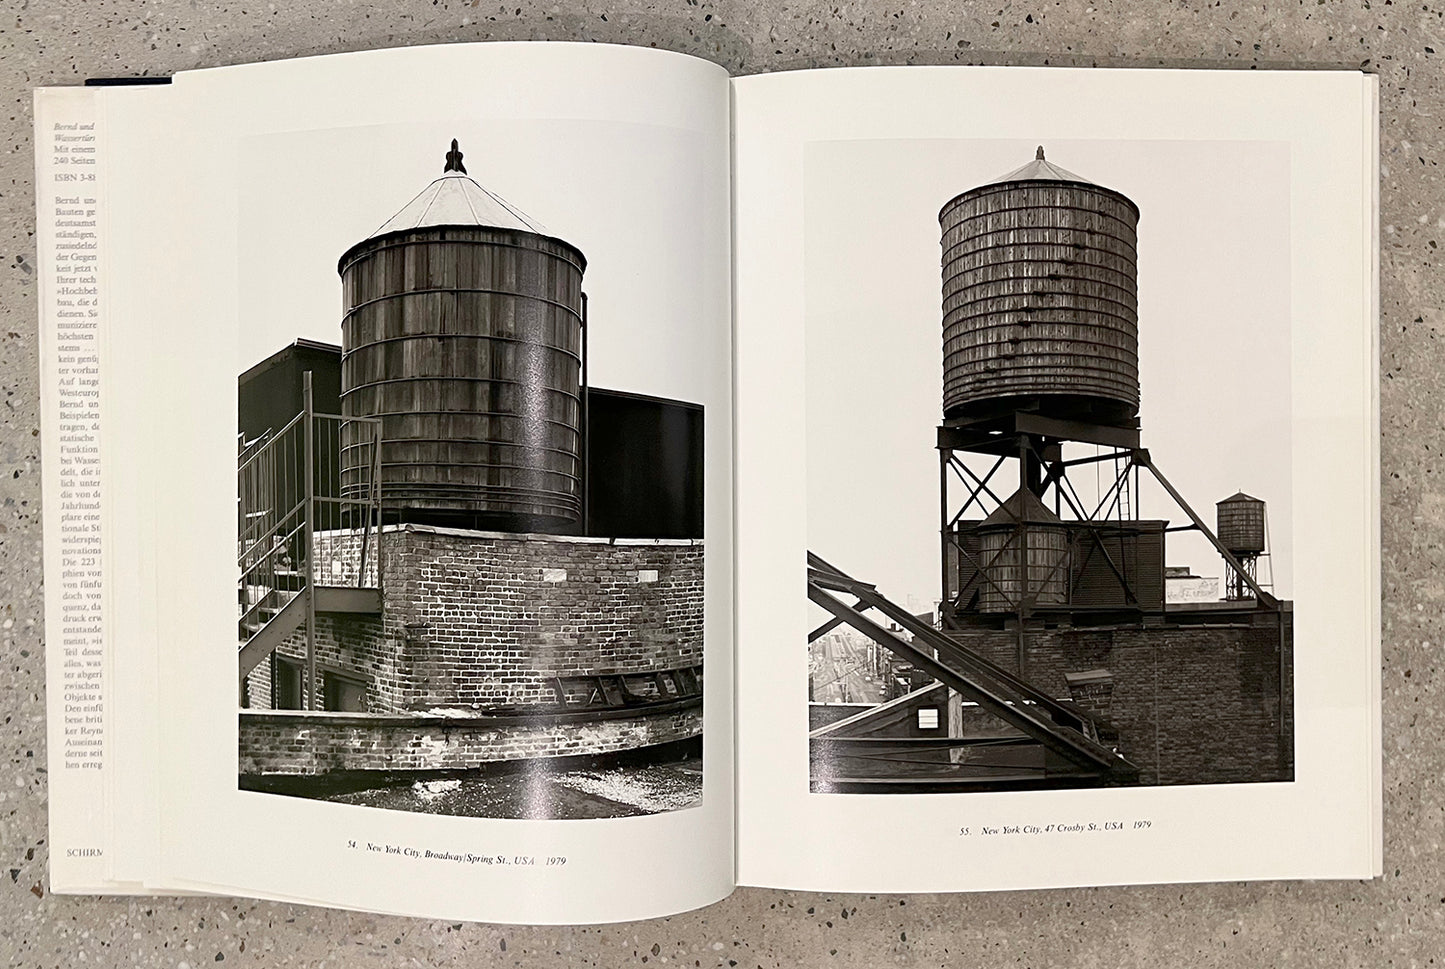 Bernd and Hilla Becher-The first 15 books published, all first editions